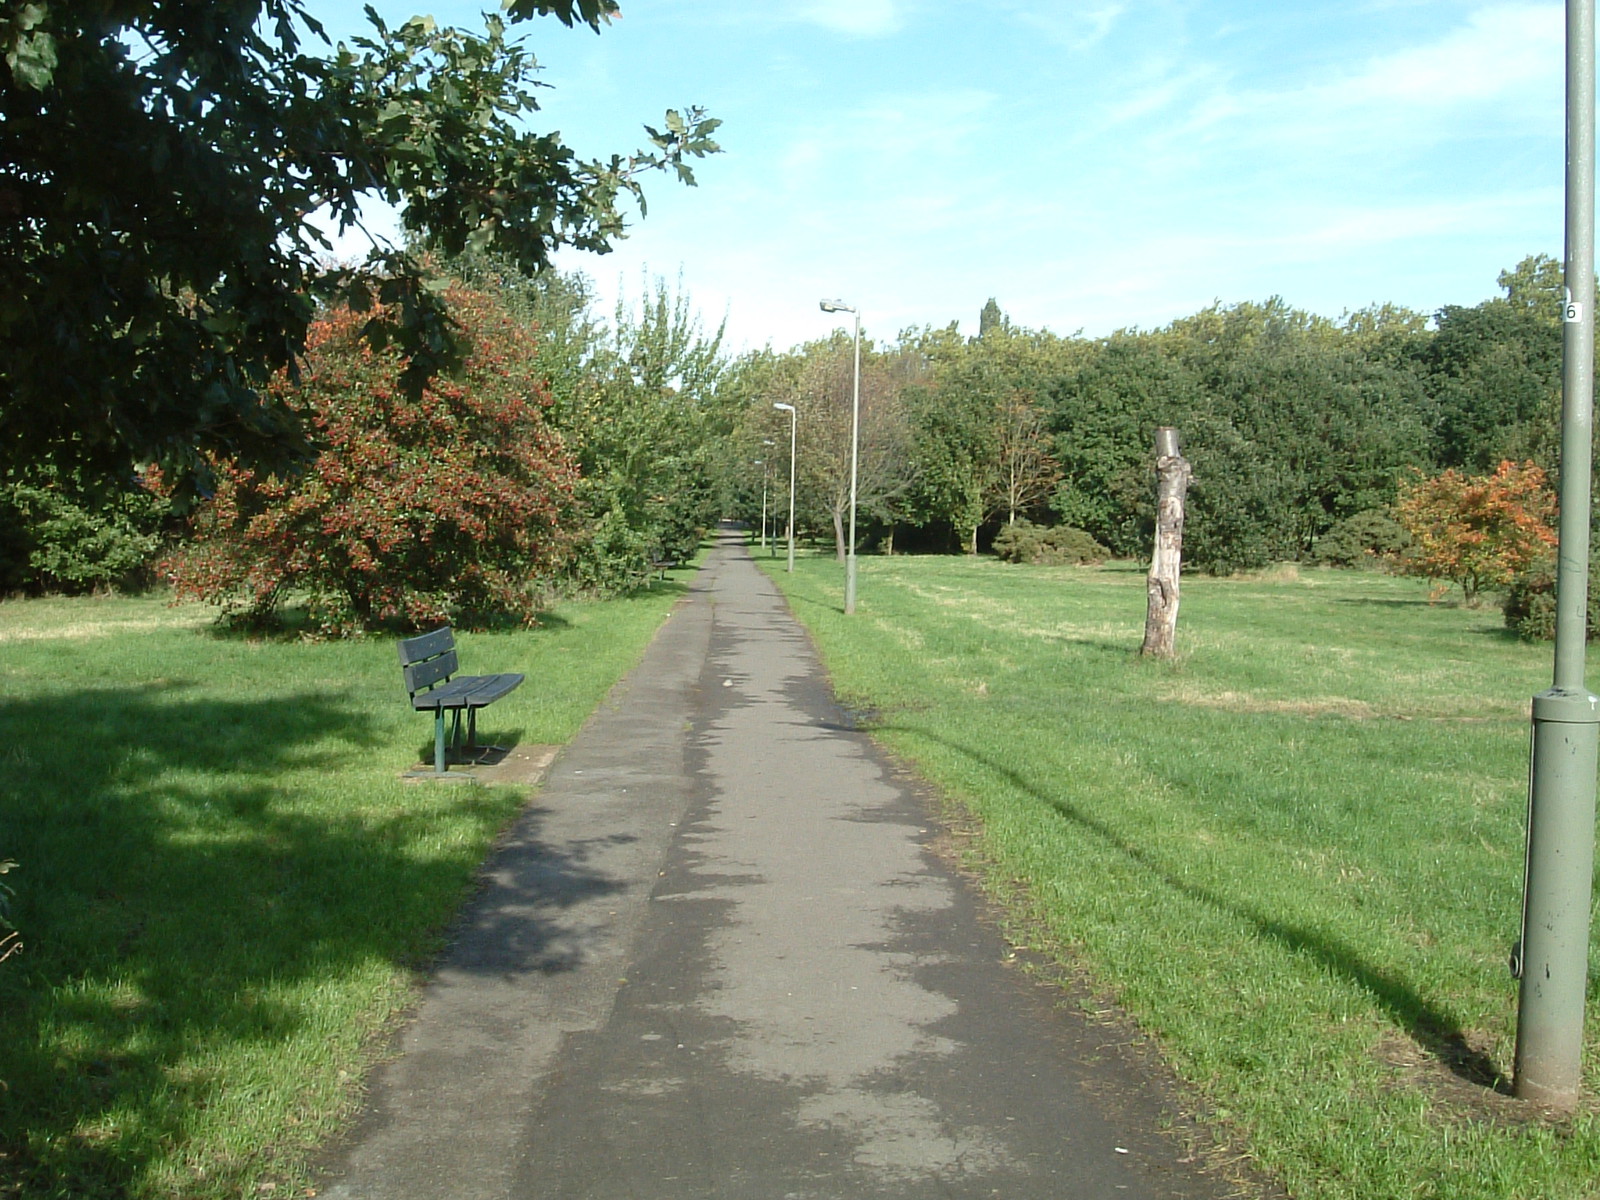 Tooting Bec Common